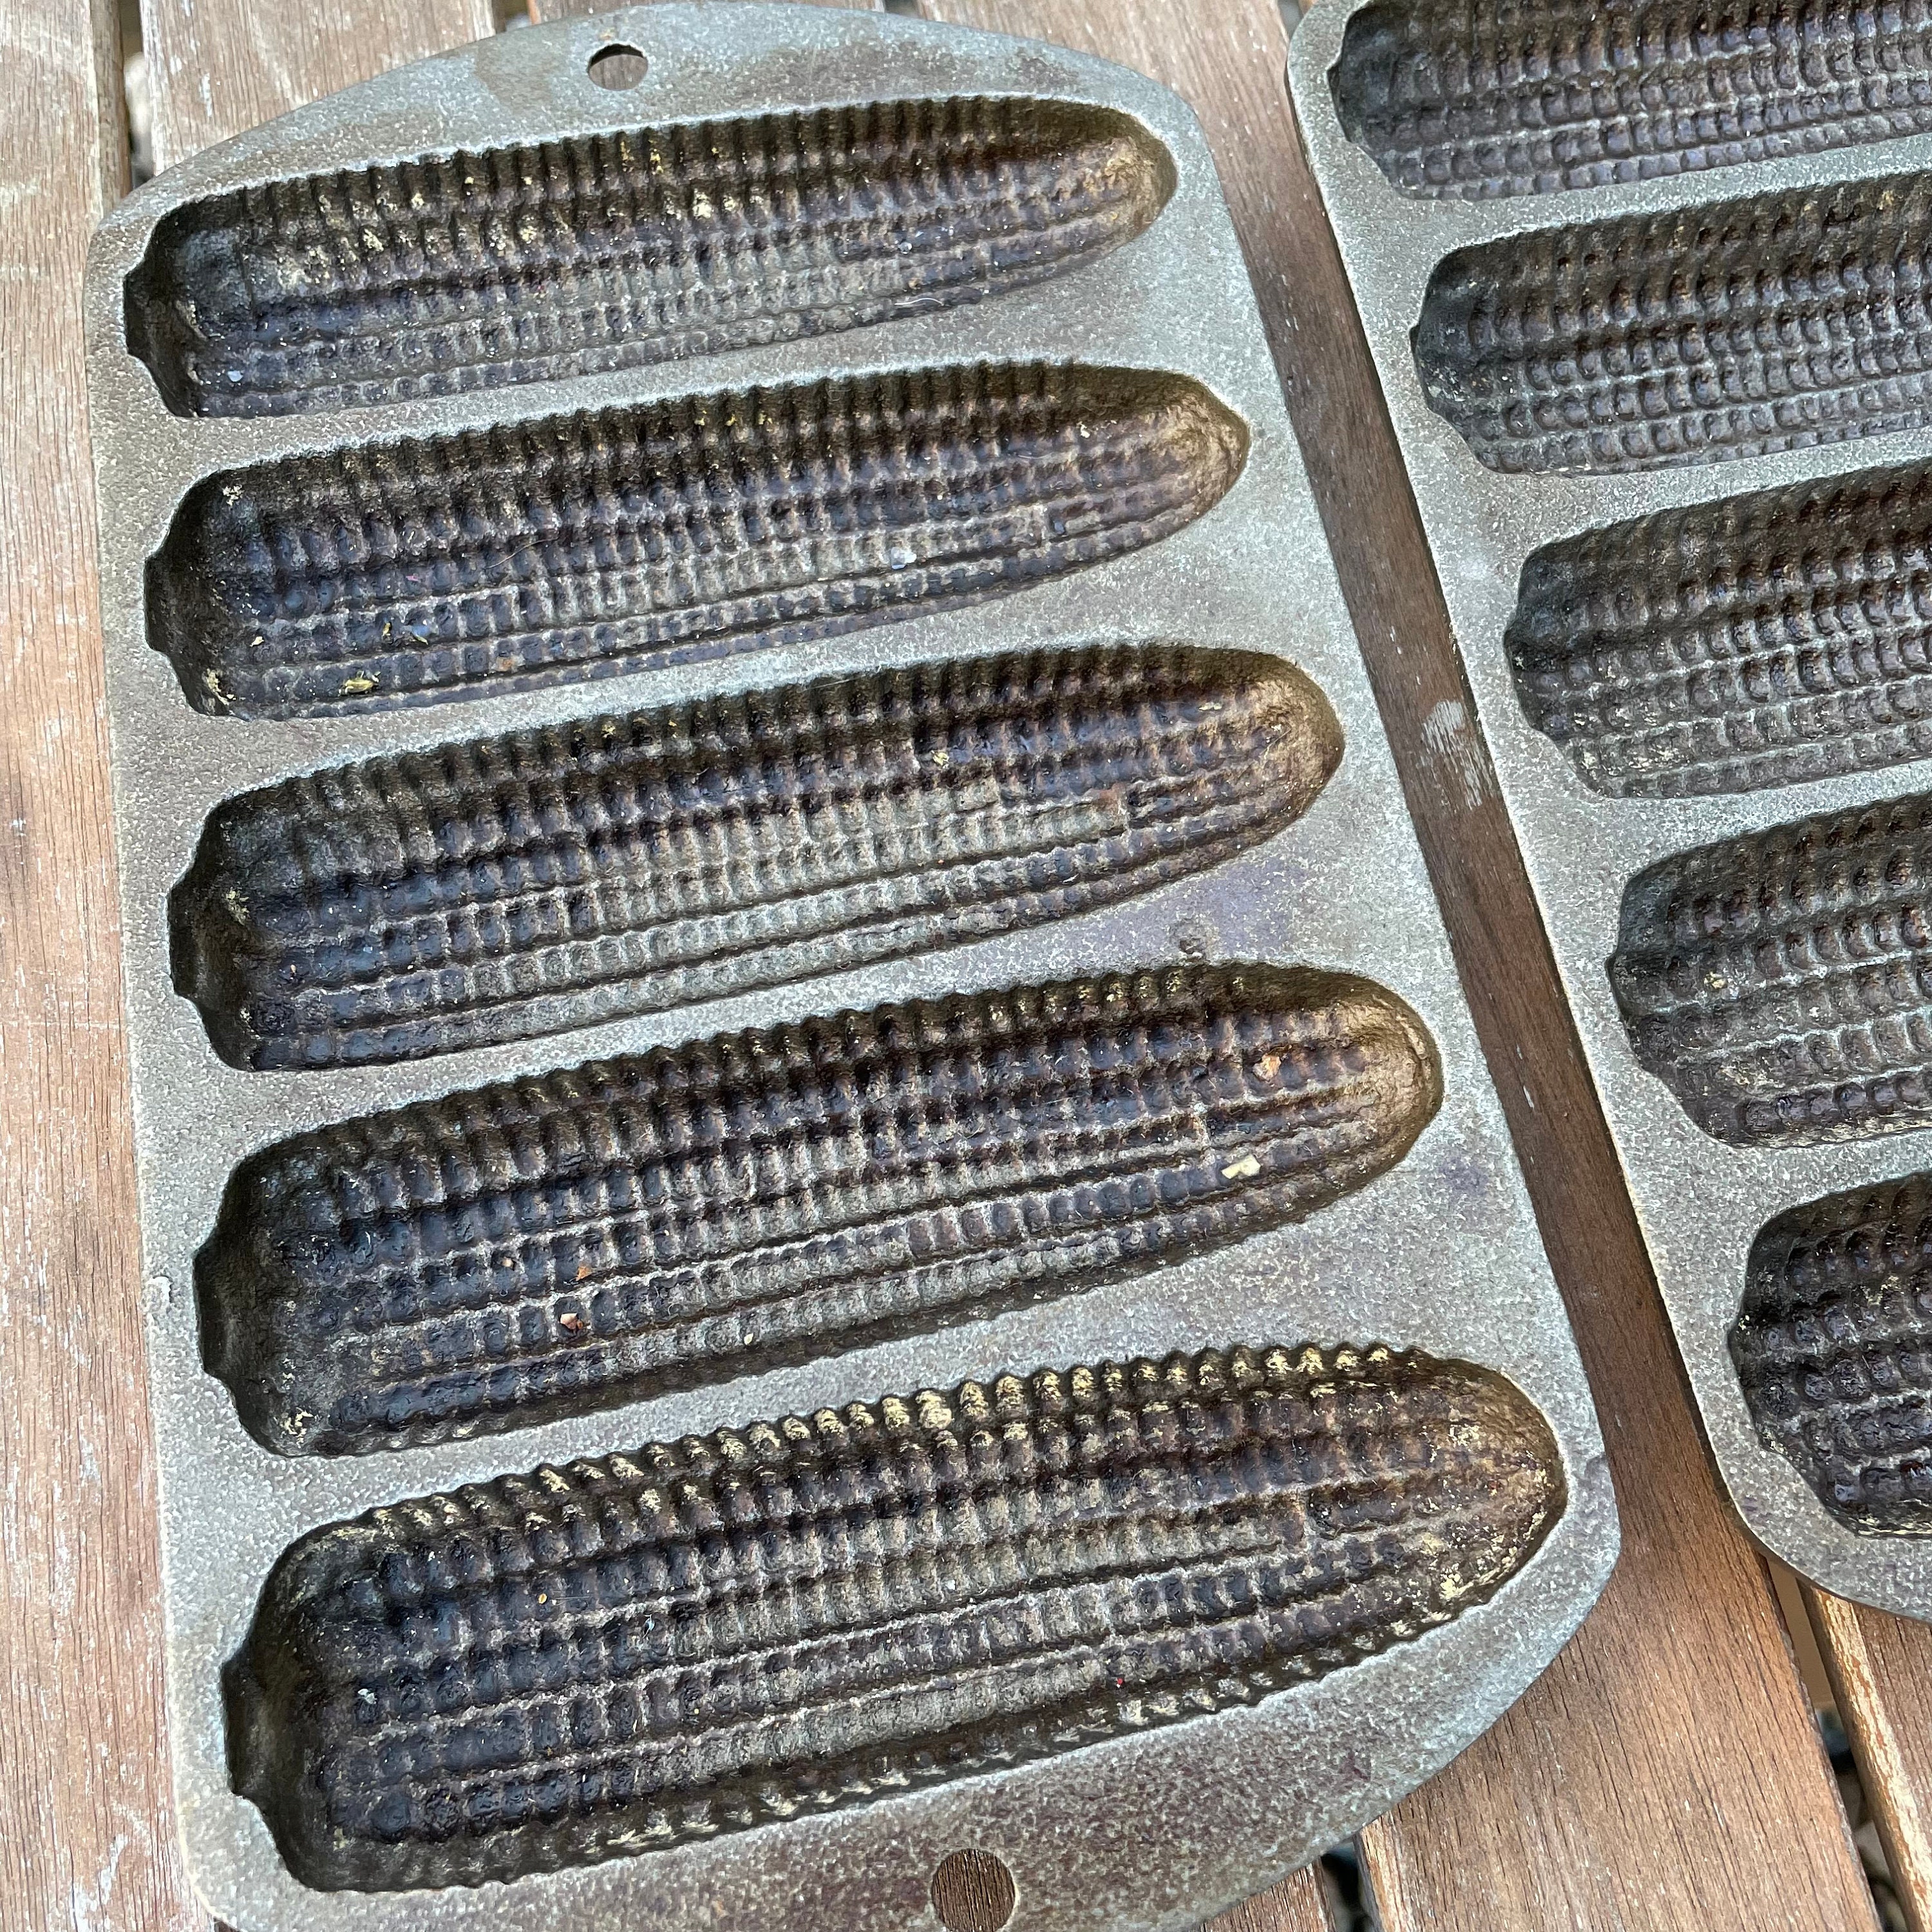 Vintage Cast Iron L1 Mold 5 Corn Muffin Pan by Lodge Vintage